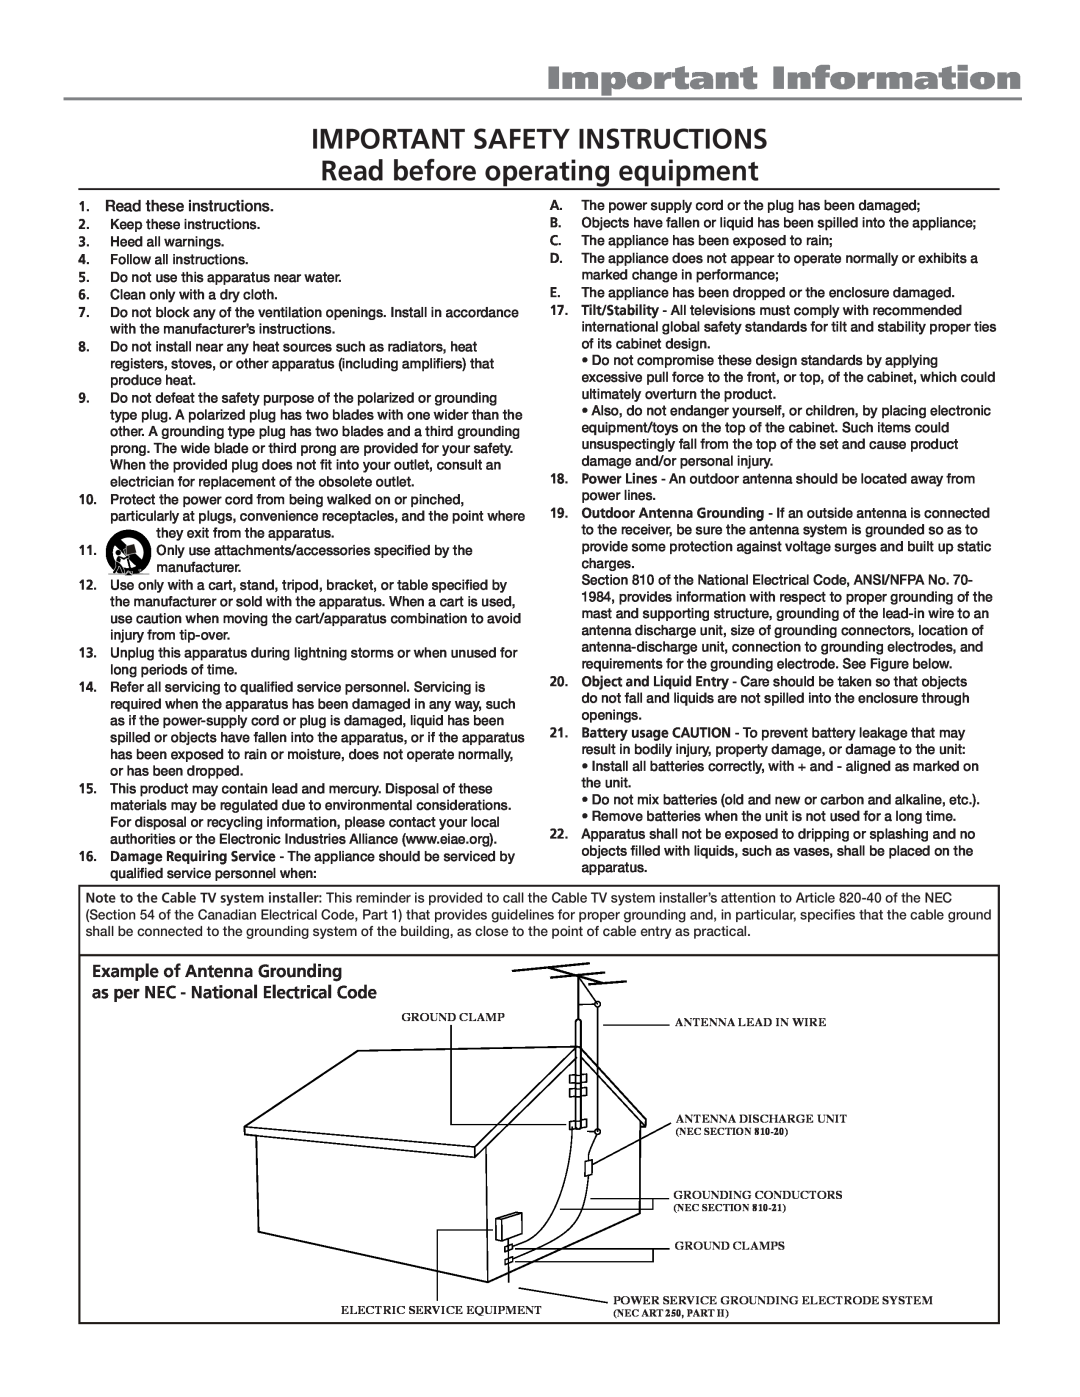 RCA 32v434t, 32V524T manual Example of Antenna Grounding as per NEC - National Electrical Code, Important Information 